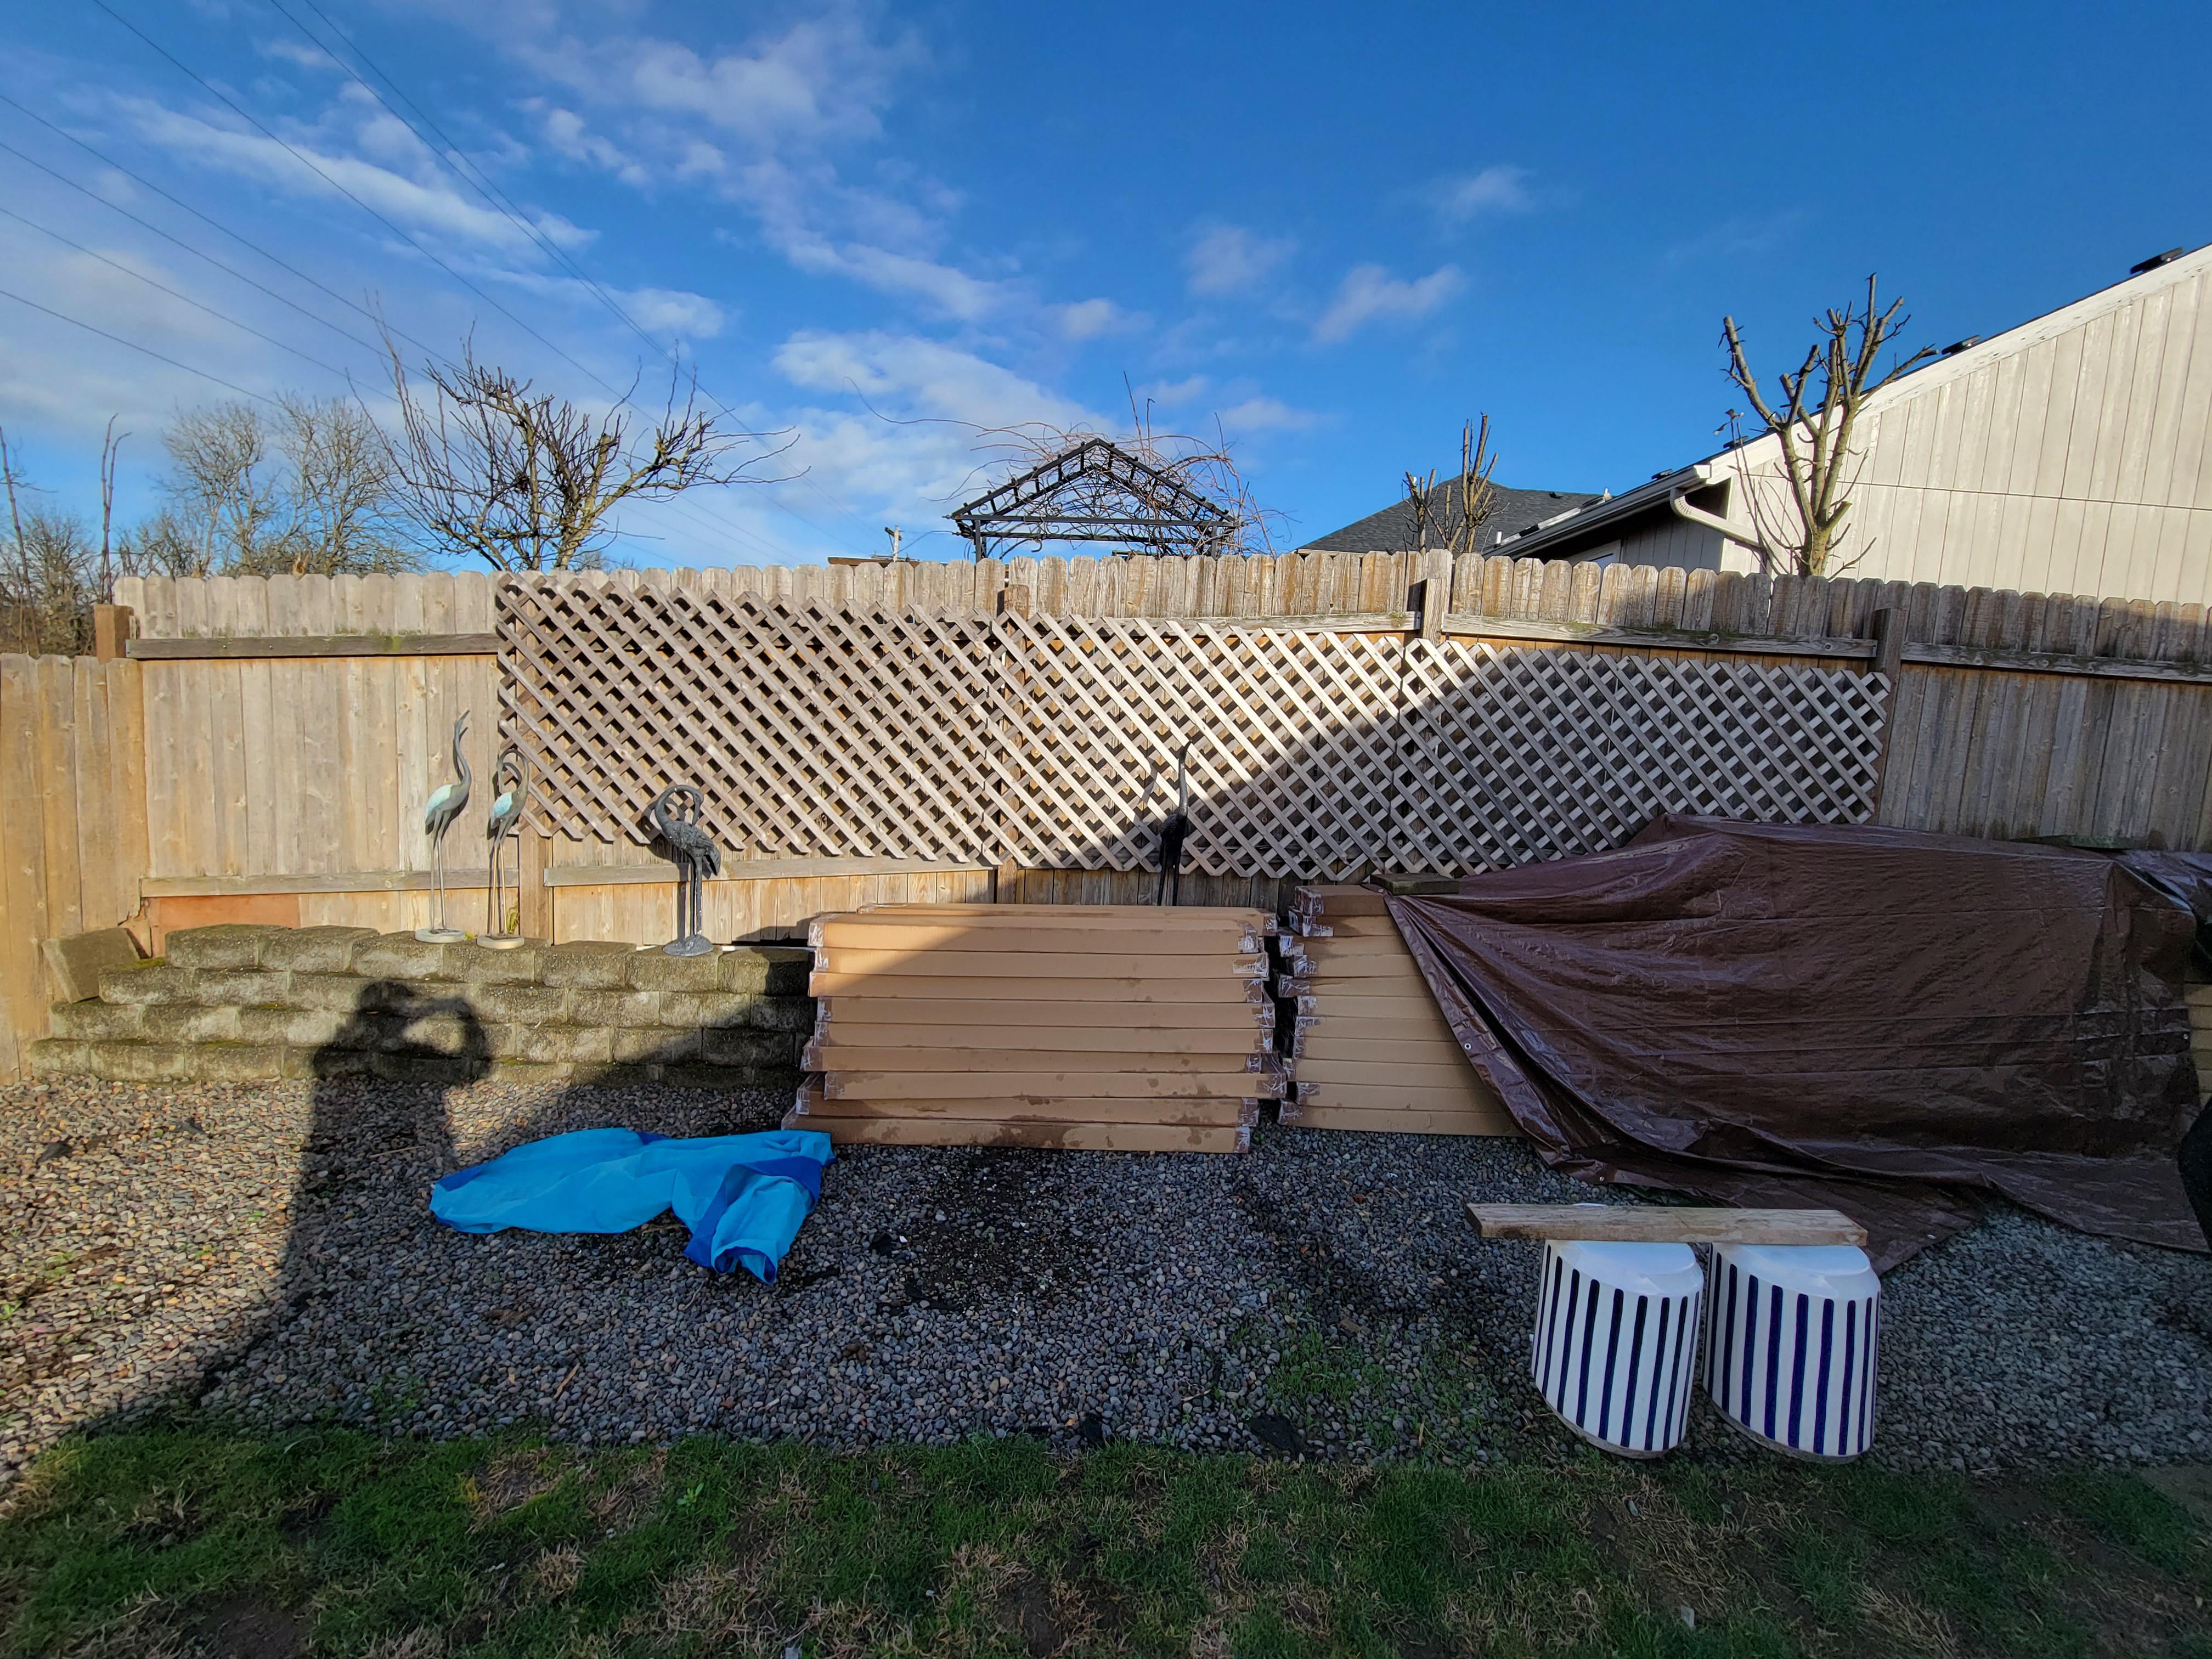 Ensure your property's security and privacy with Dante's Contracting & Construction's privacy fencing solutions. We design and install sturdy and attractive fences to enhance your property's aesthetics and seclusion.